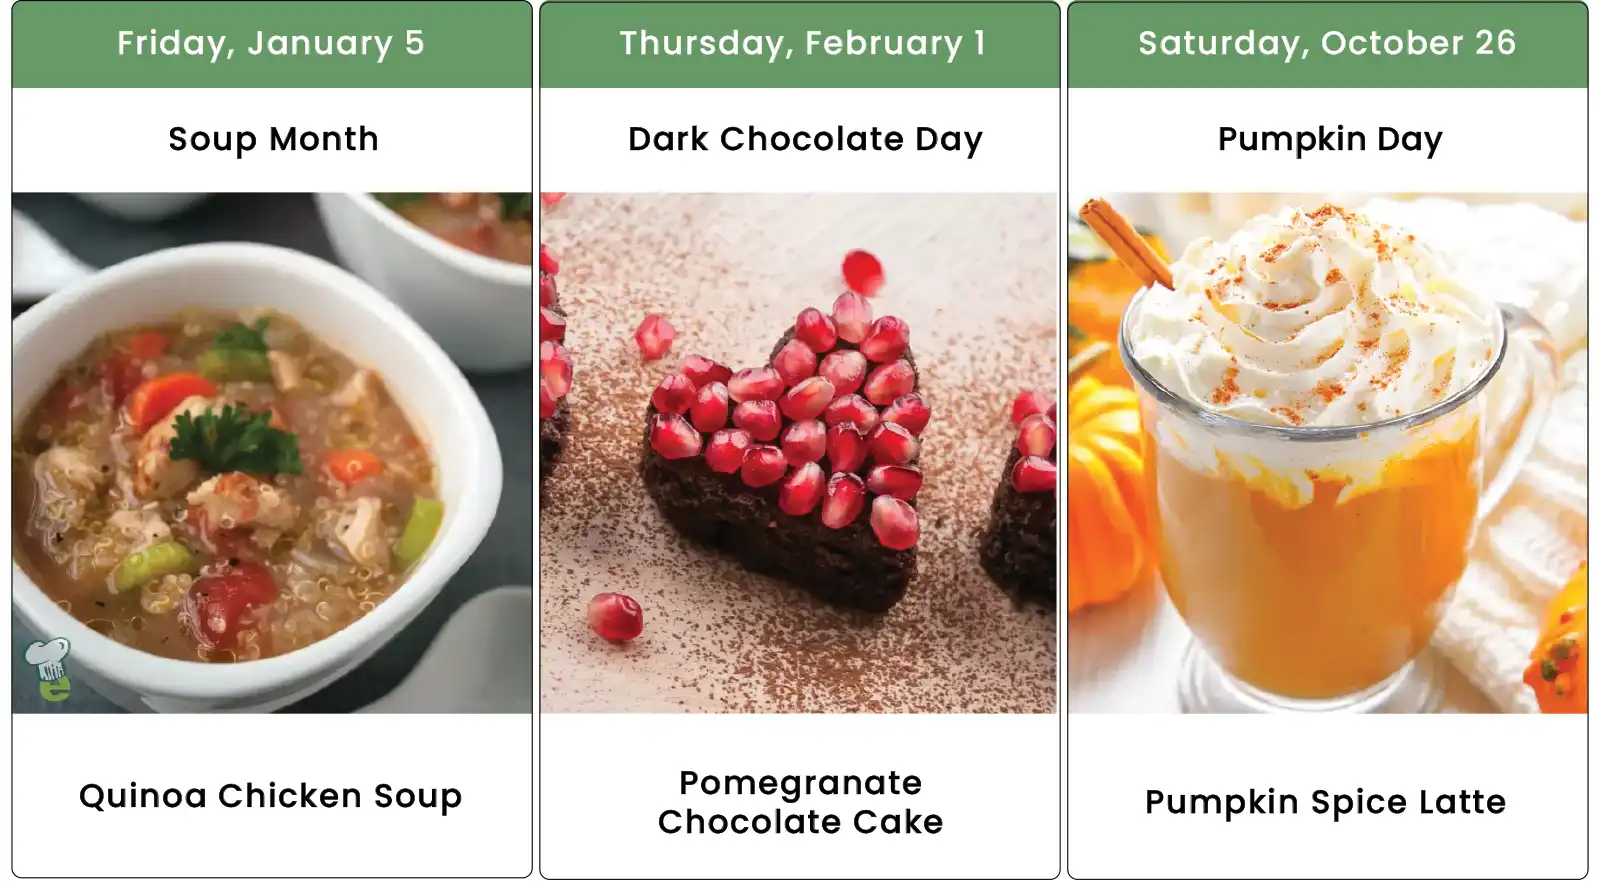 Recipe images for 2024 national food days